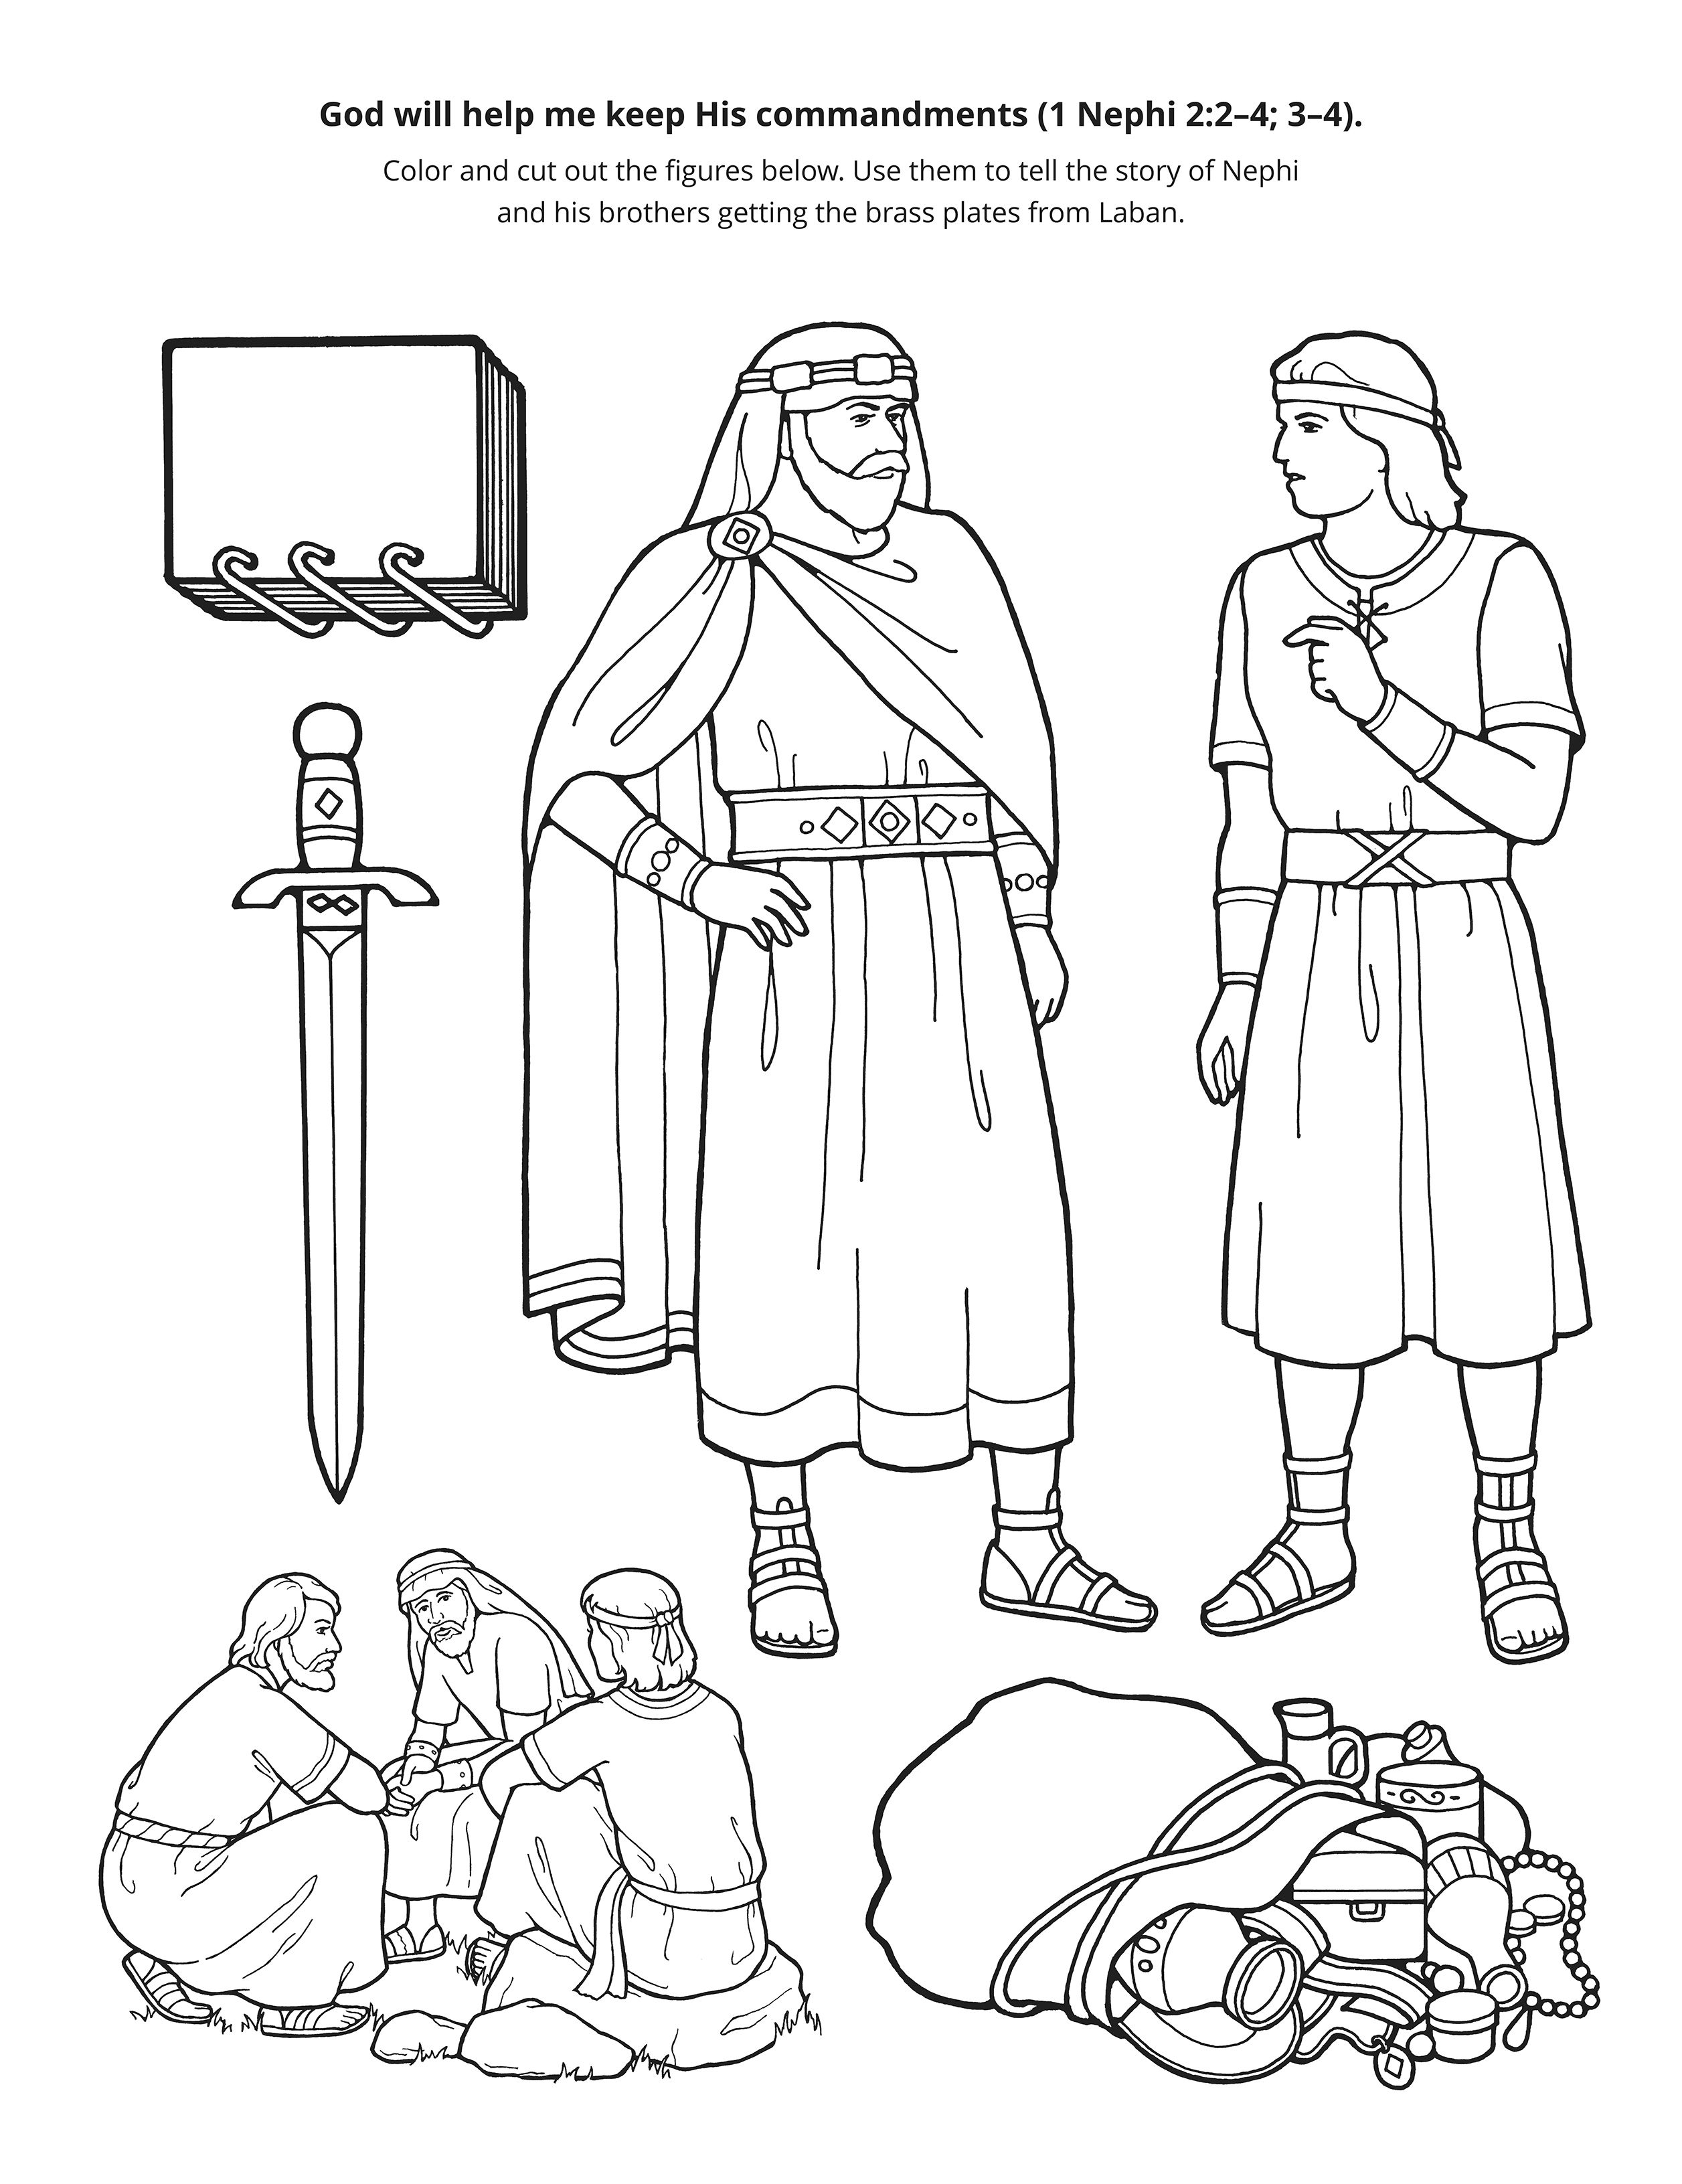 Line art of Nephi and Laban with plates.